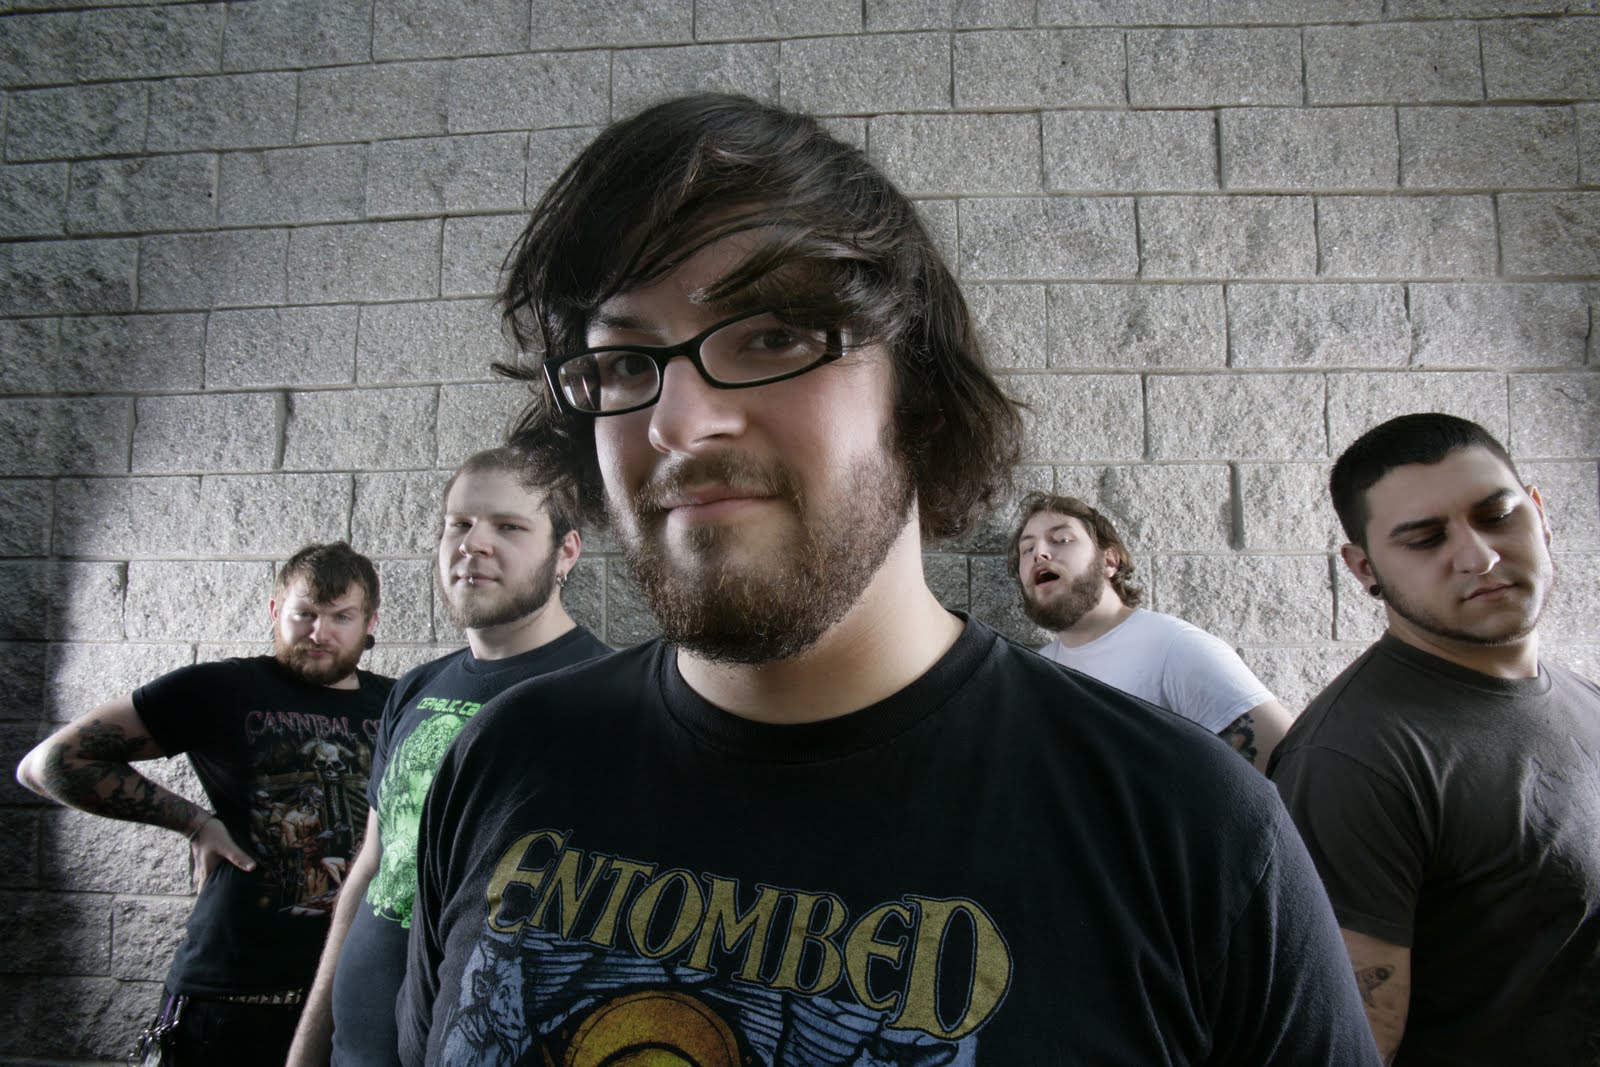 The Black Dahlia Murder Interview: Life on the Road & Ties with GWAR